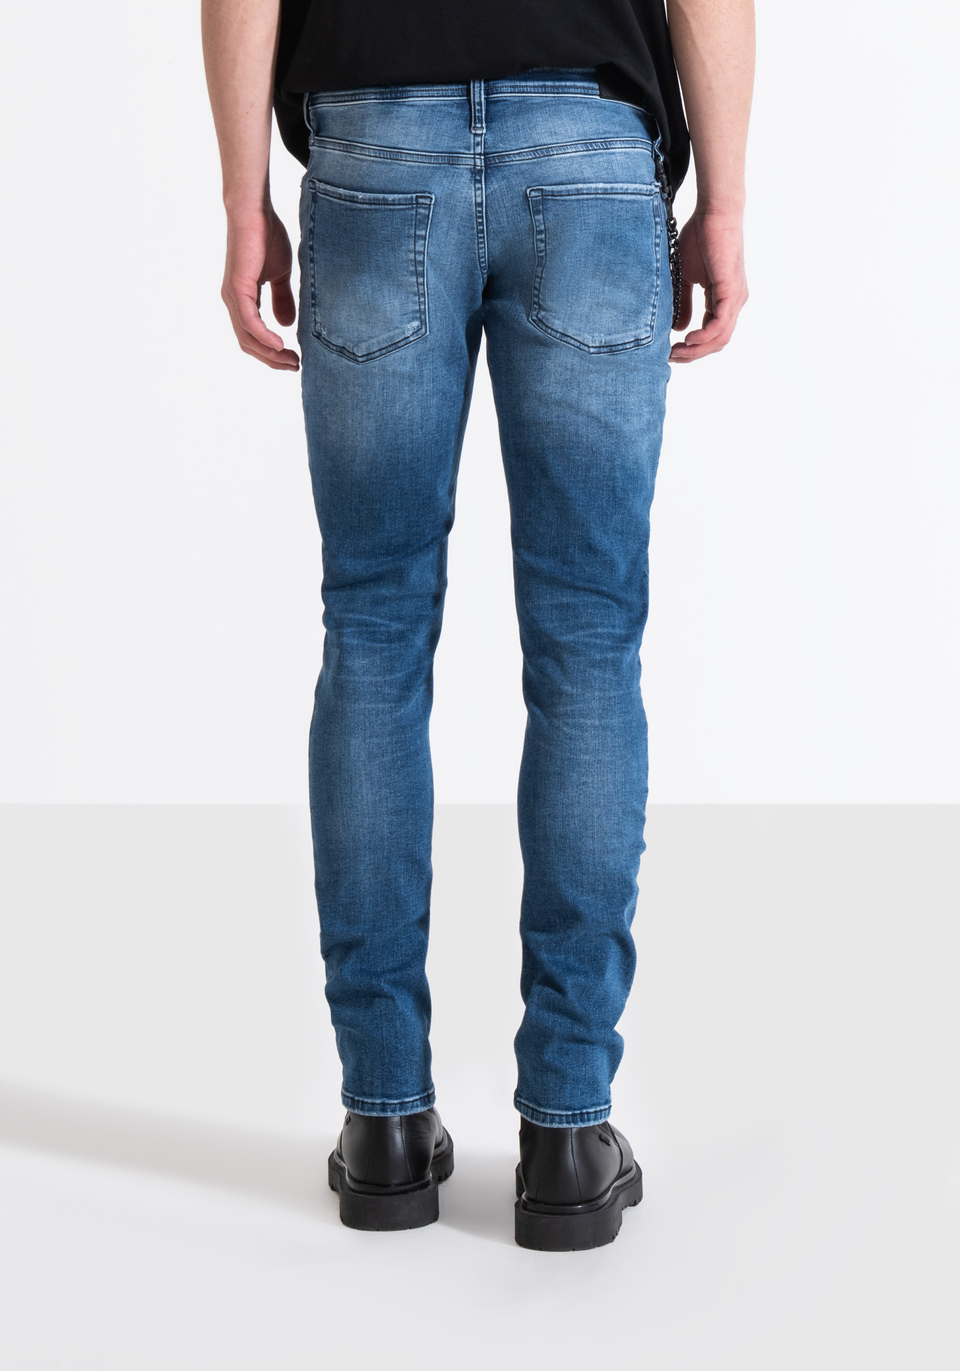 IGGY TAPERED FIT JEANS IN CHARCOAL BLUE STRETCH-DENIM - Antony Morato Online Shop